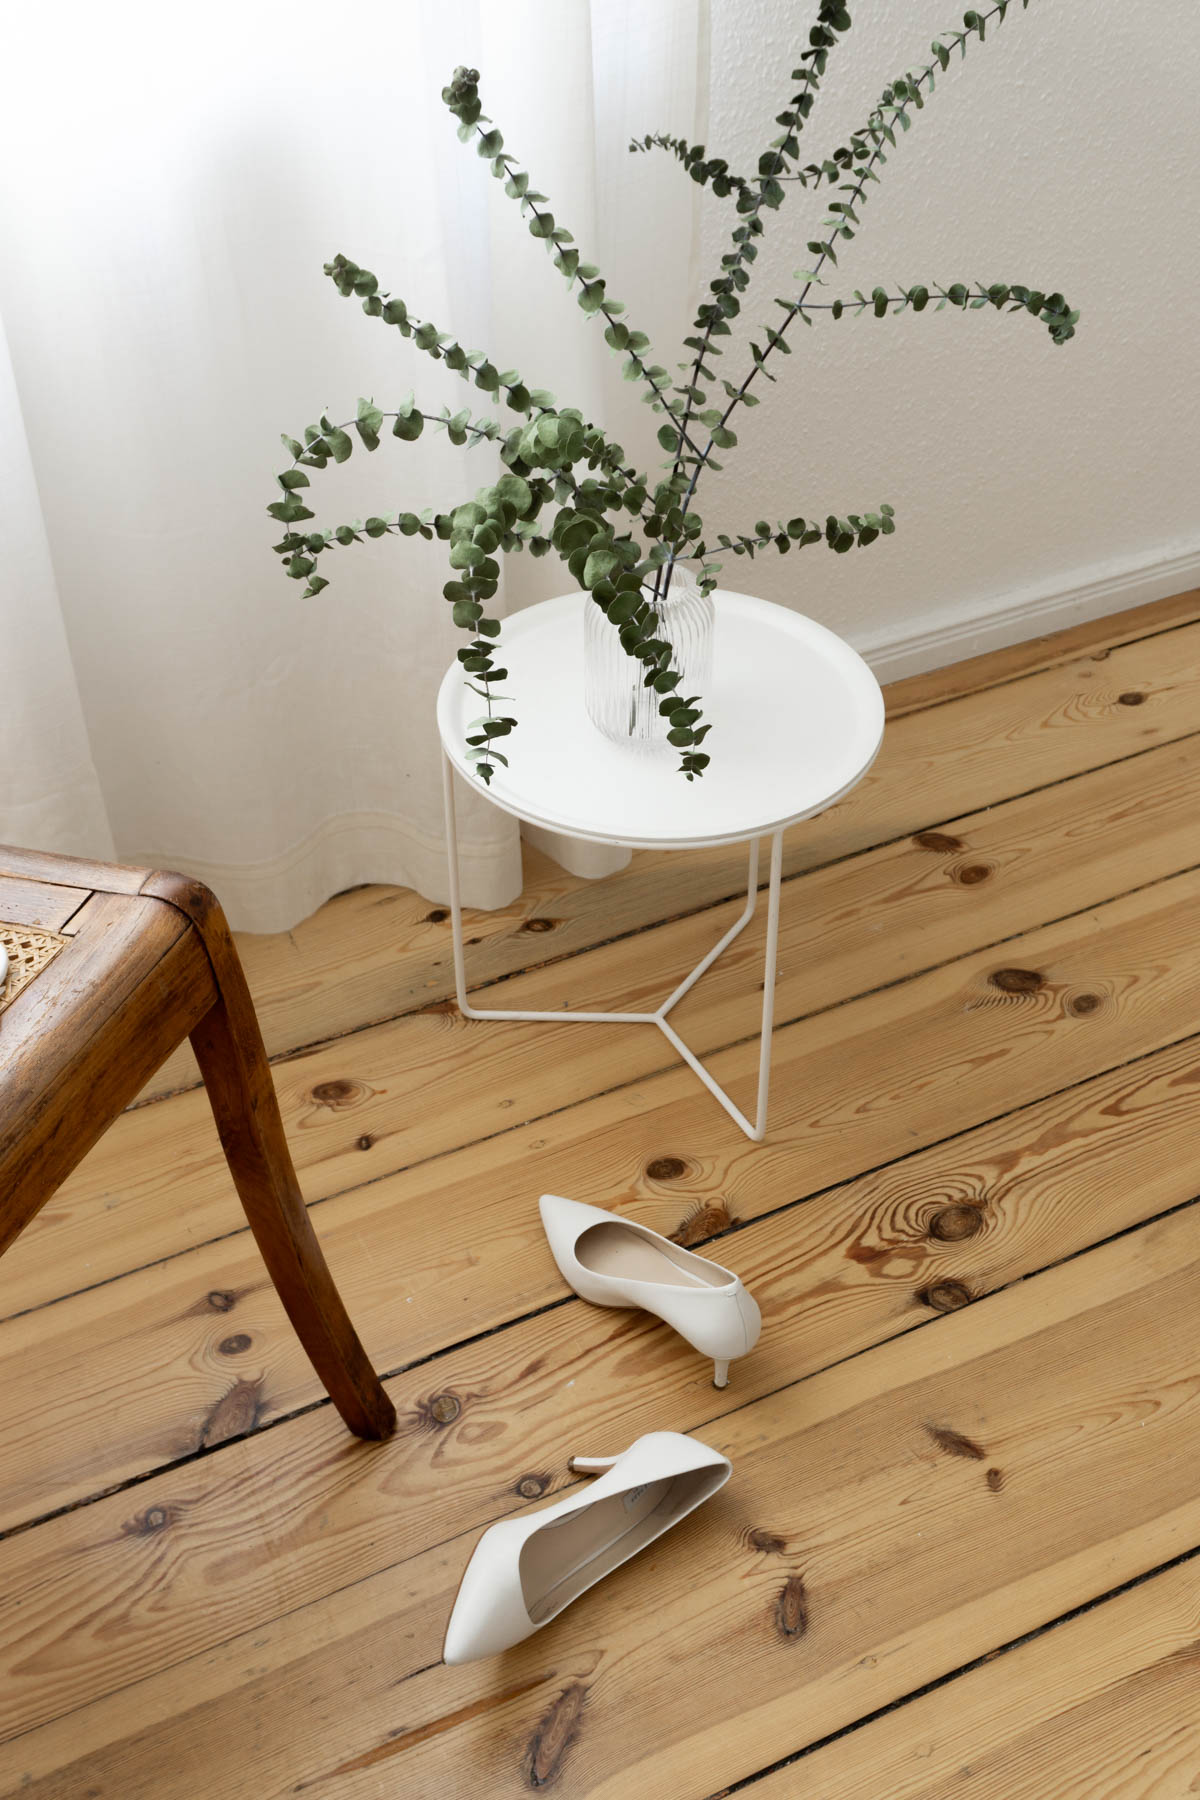 Vintage Cane Chair and Dried Eucalyptus - Scandinavian Interior Design - Bedroom Details - RG Daily Blog